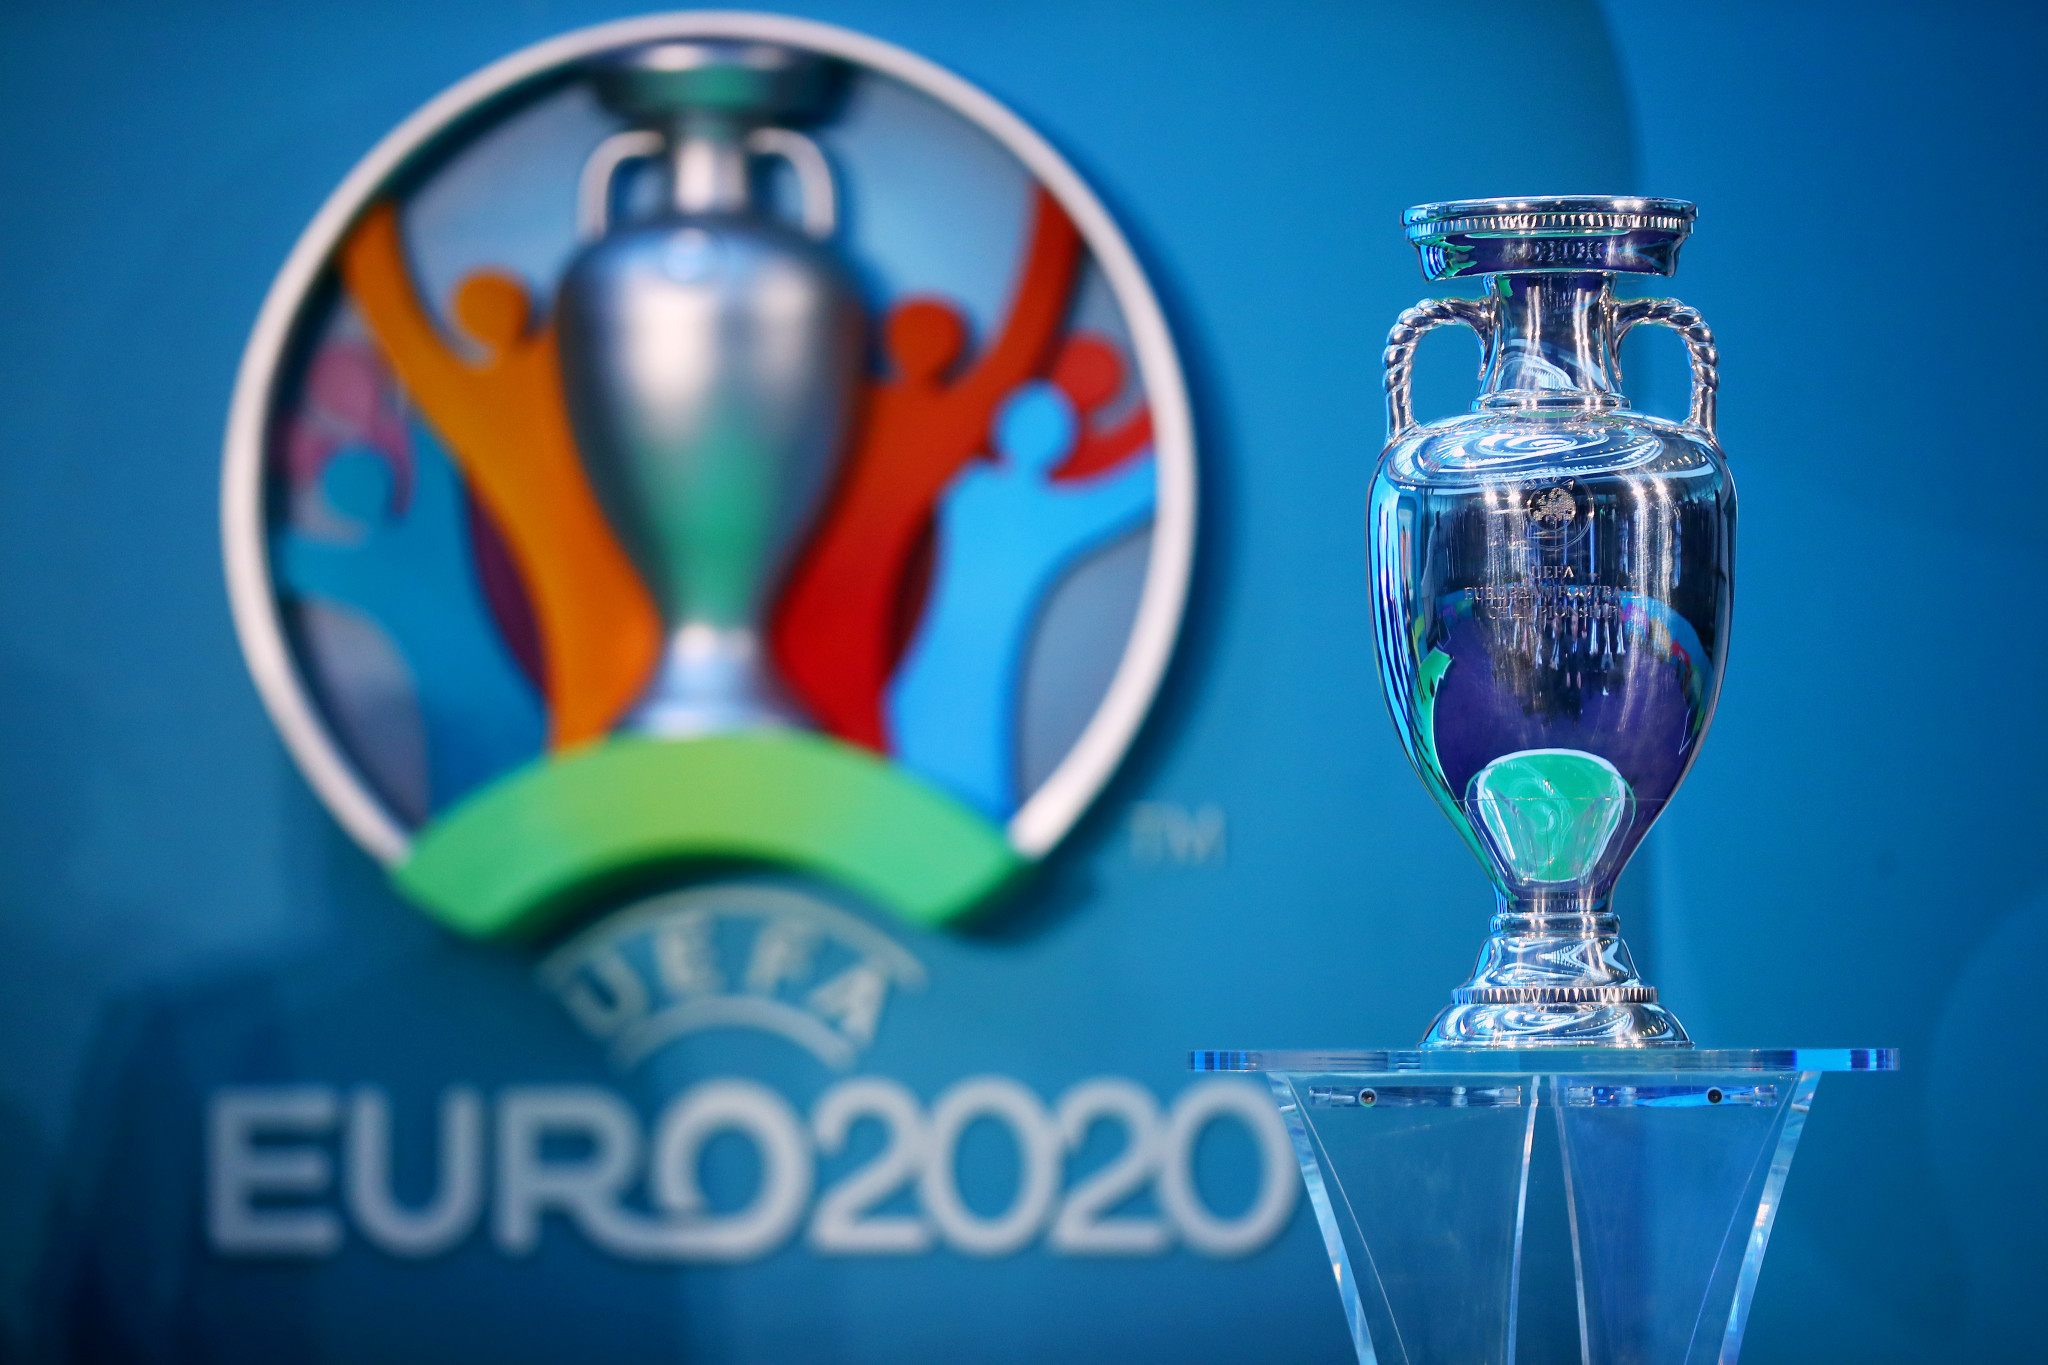 Three cities risk being cut as Euro 2020 hosts over lack of capacity guarantees